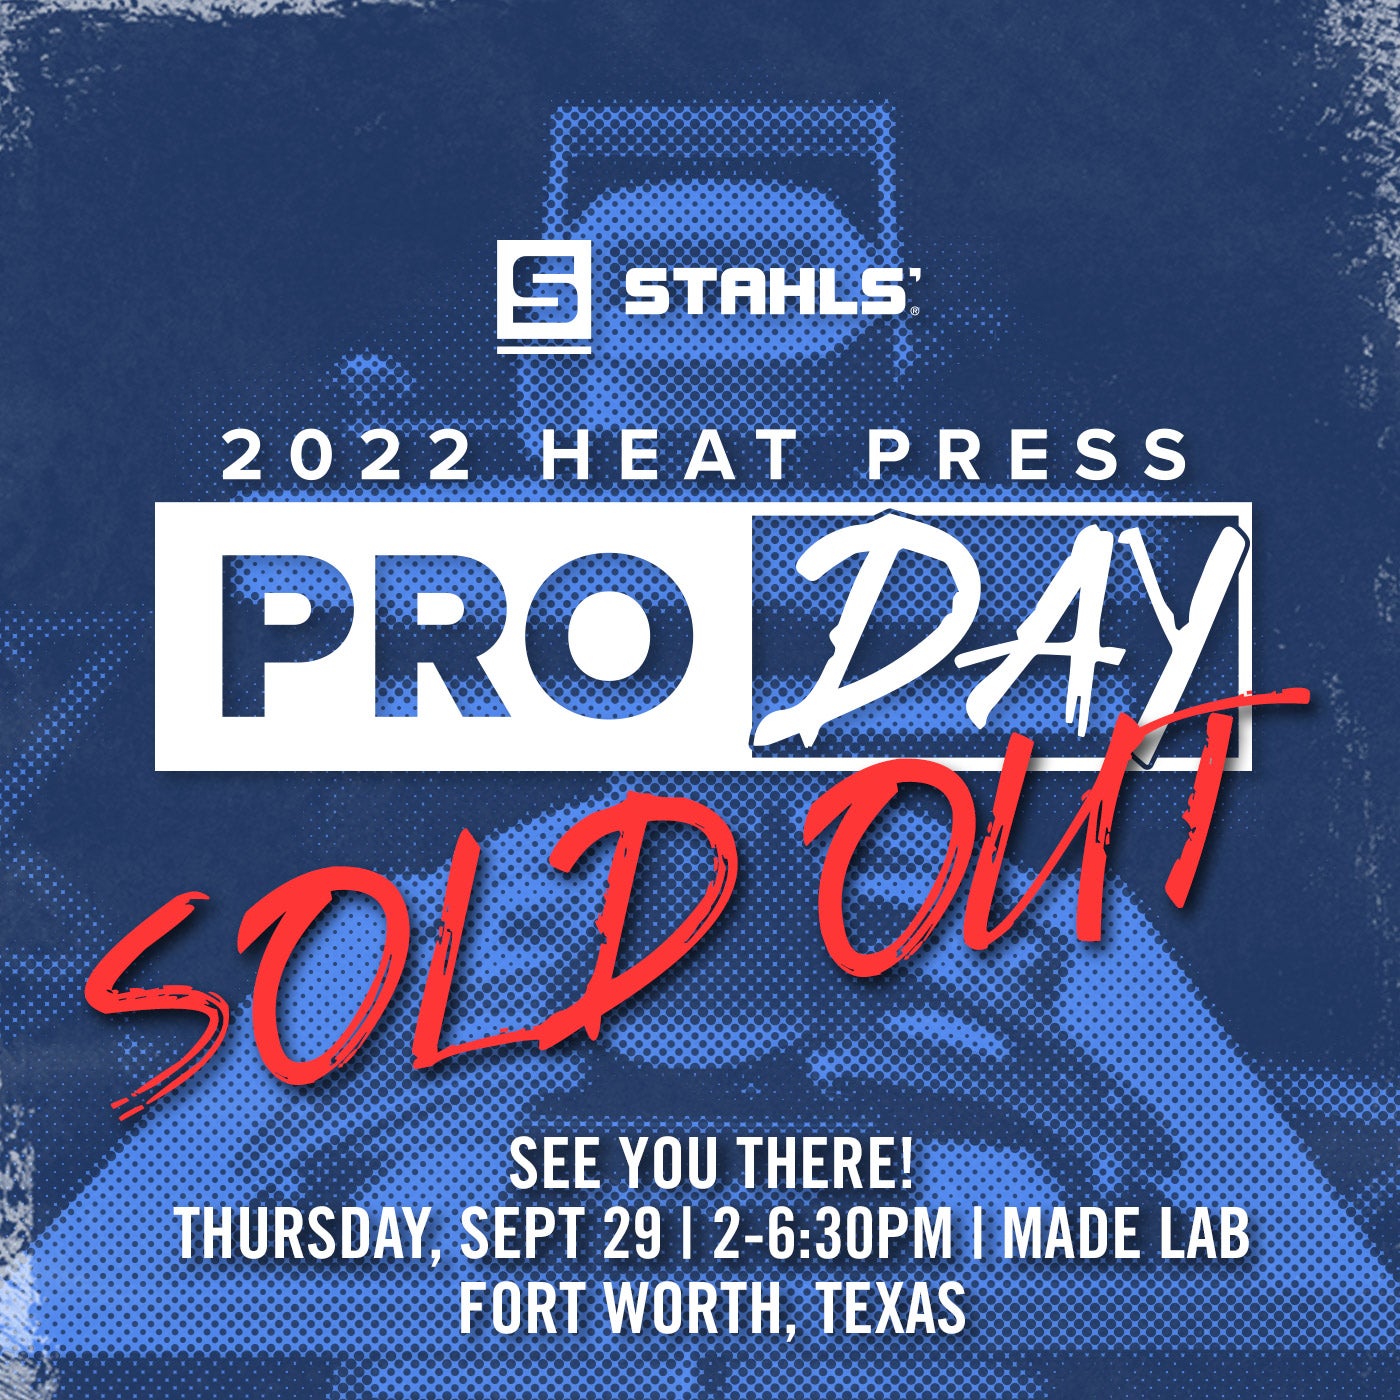 Heat press pro day sold out event